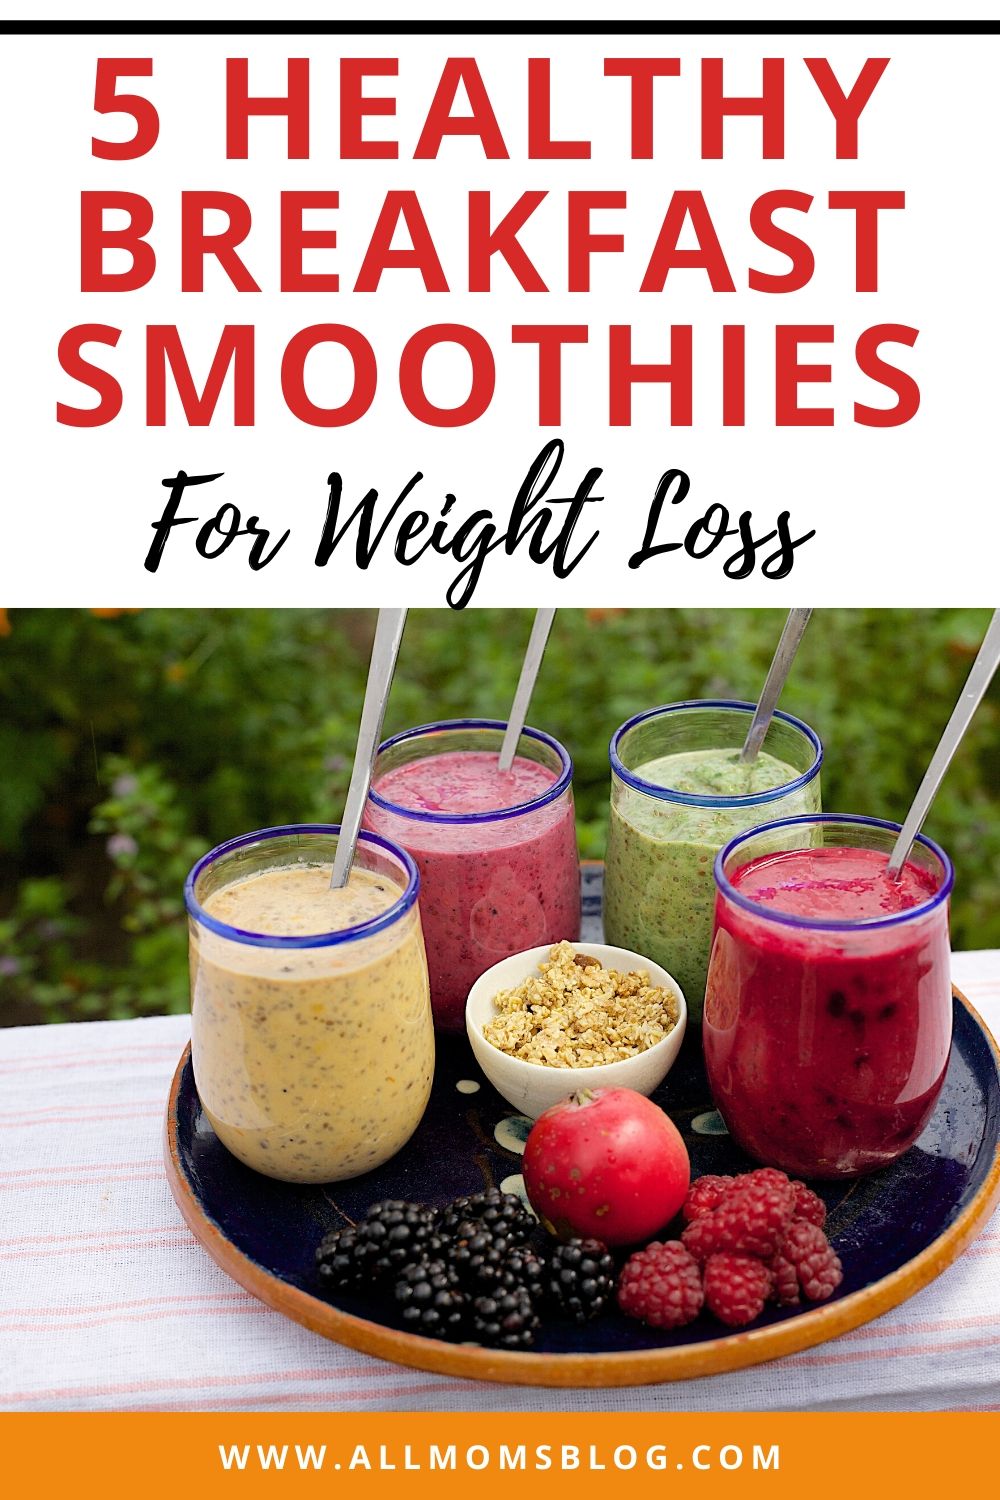 5 Healthy Breakfast Smoothies For Weight Loss All Moms Blog 0821